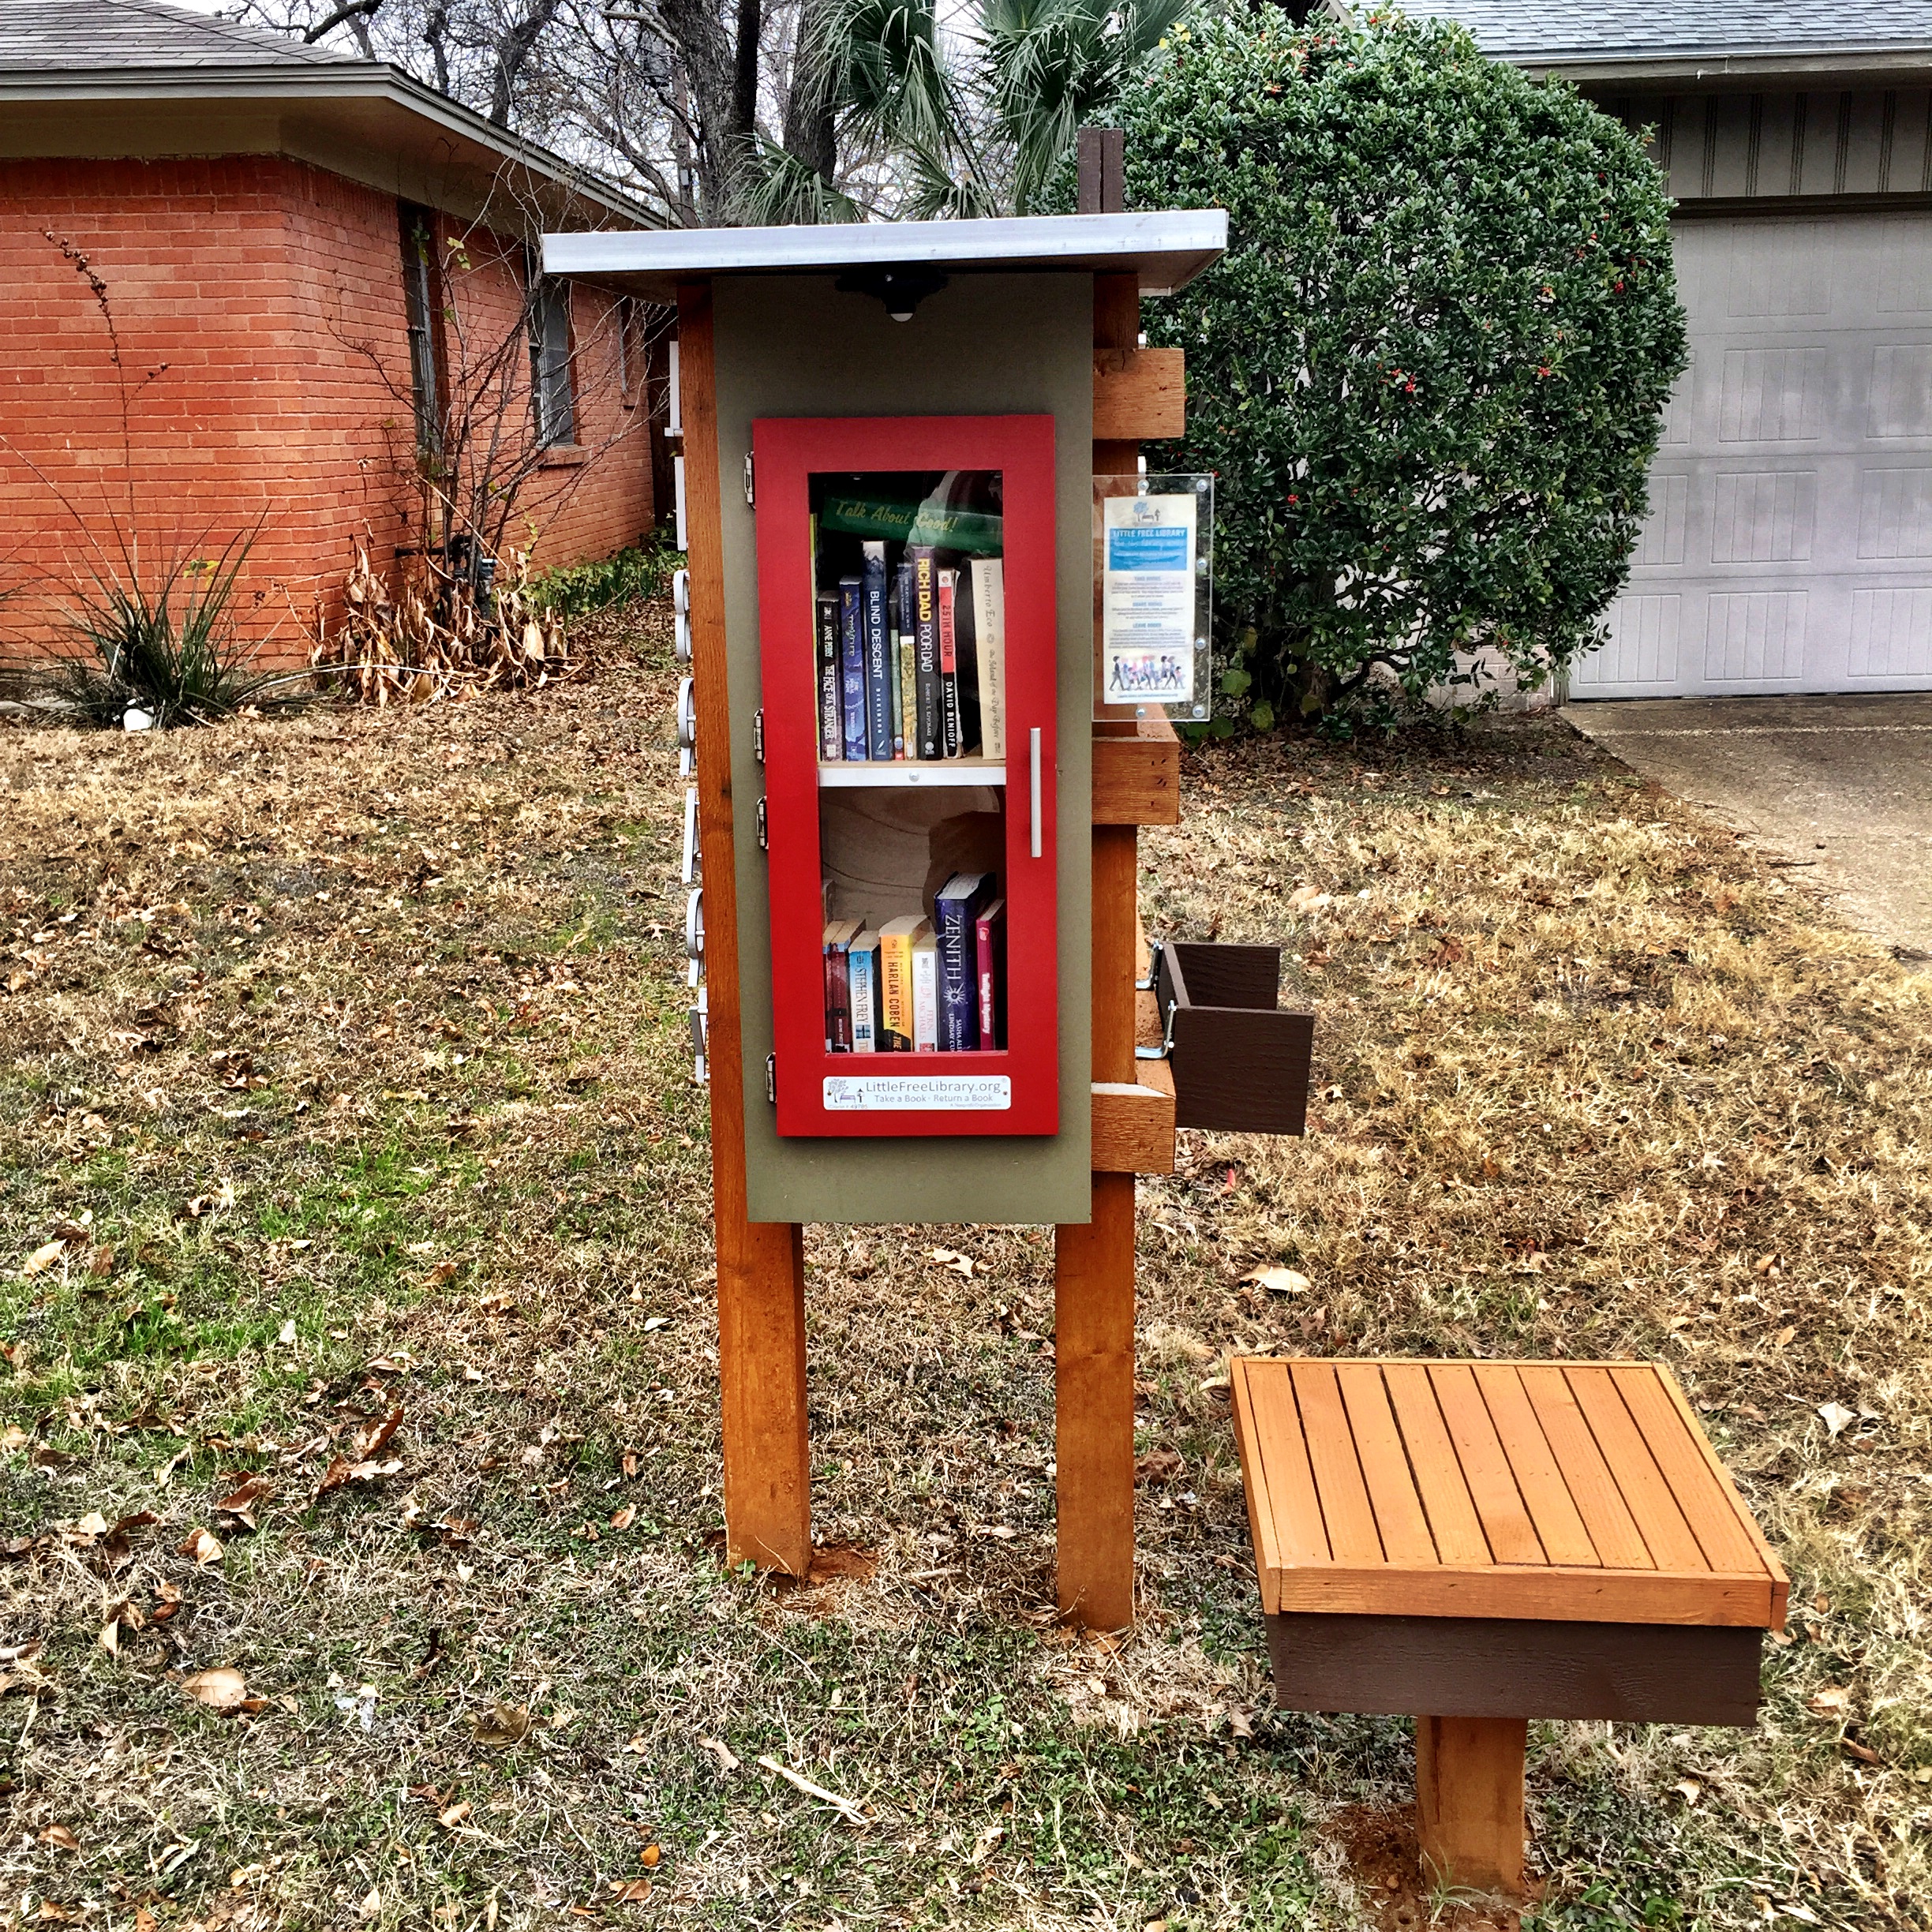 How to Play the Little Library Game